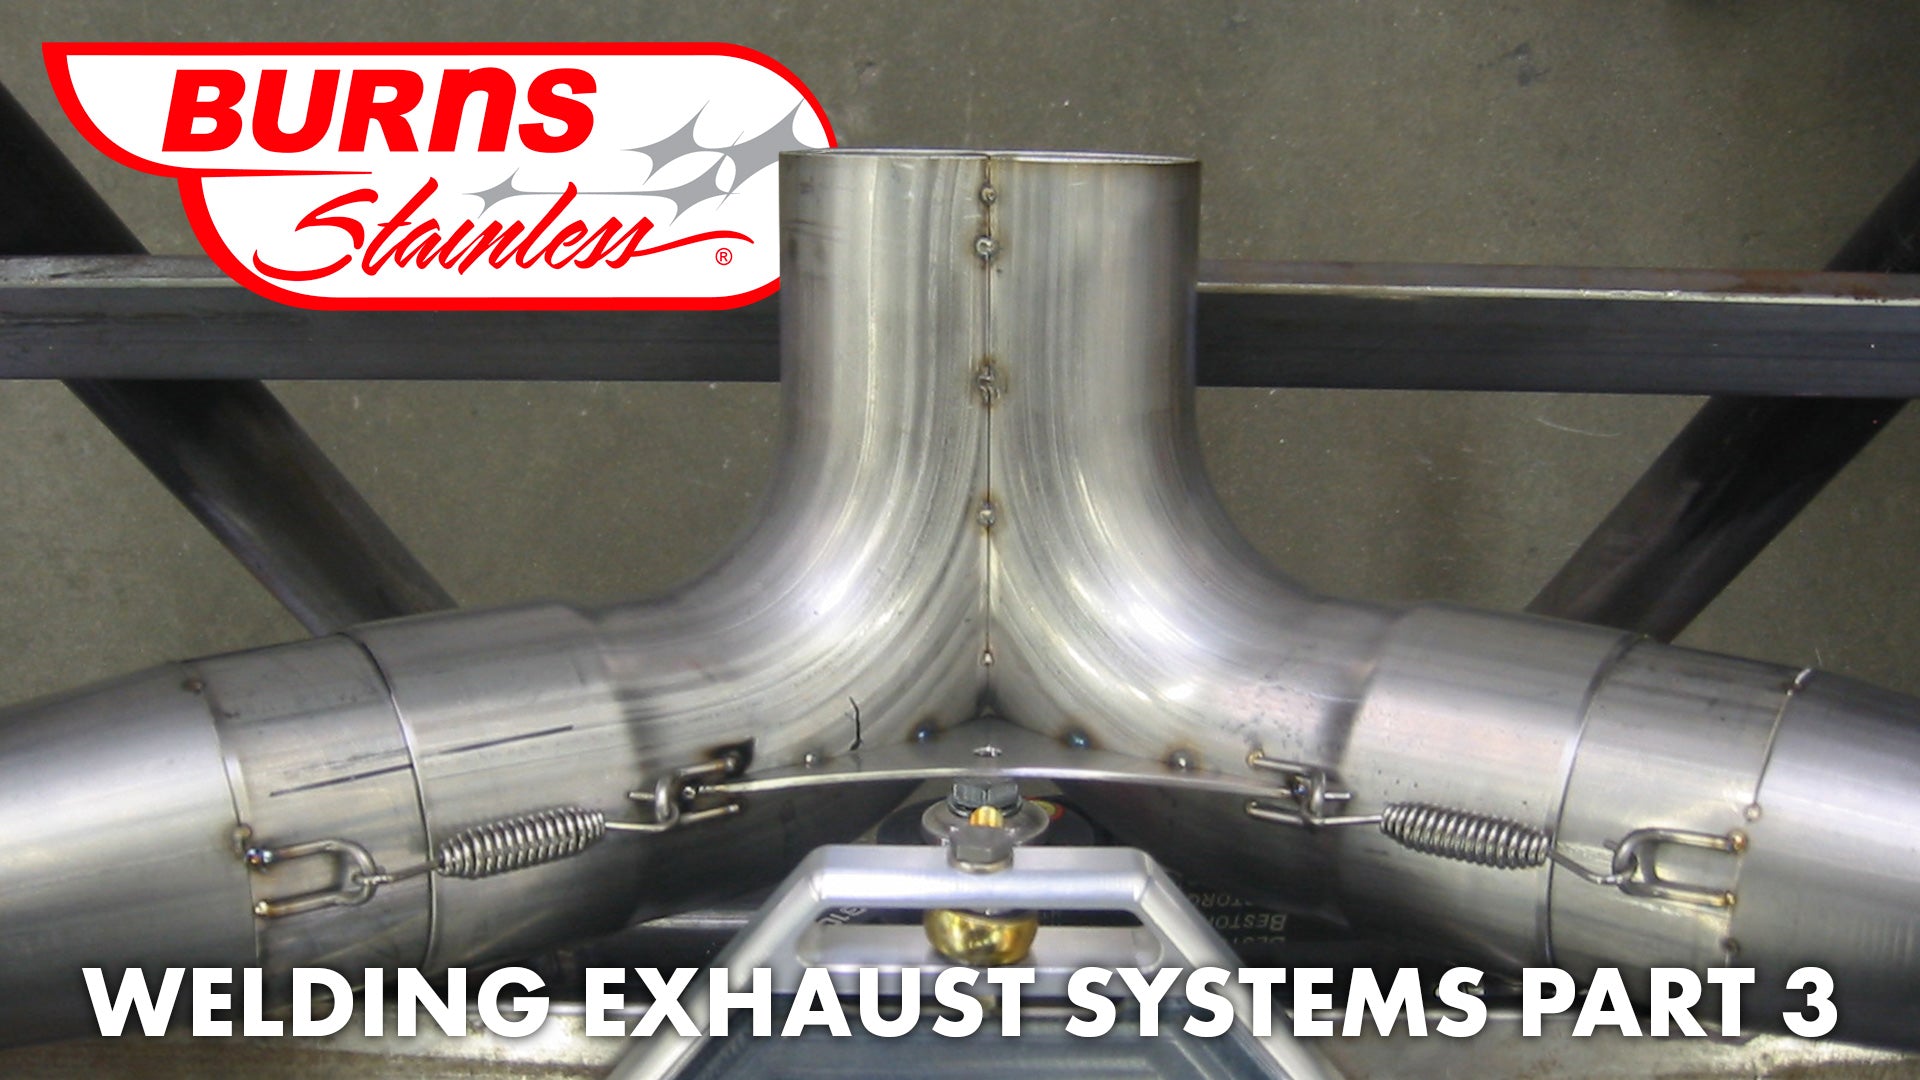 Welding Exhaust Systems - Part 3